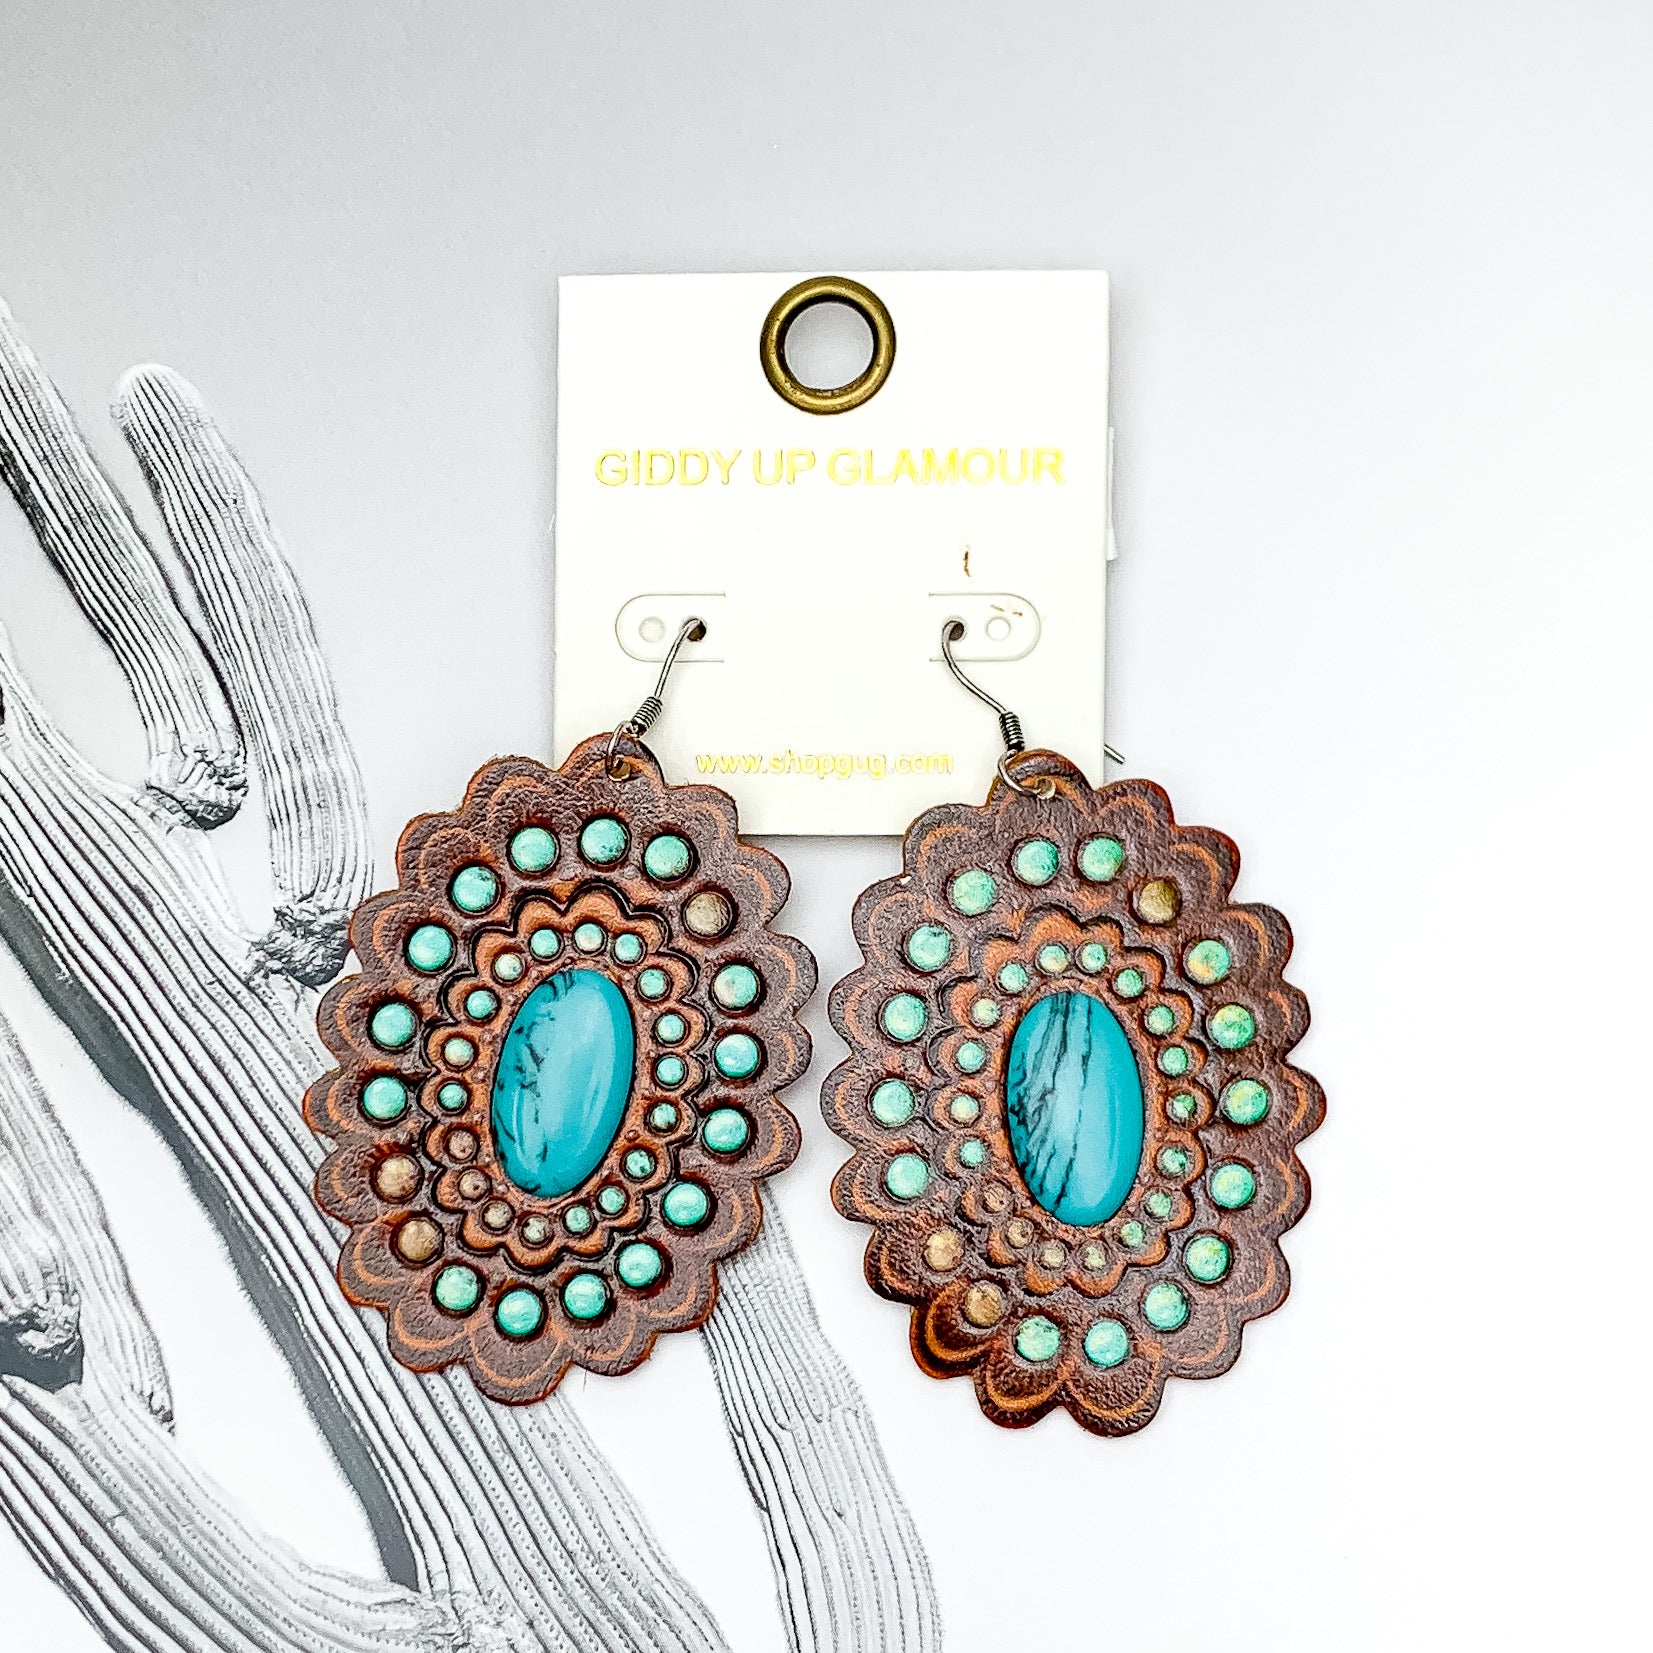 Scalloped, oval drop earrings with a silver fish hook. These earrings have a faux leather tooled print with a center turquoise stone. These earrings are pictured on a white and black background. 